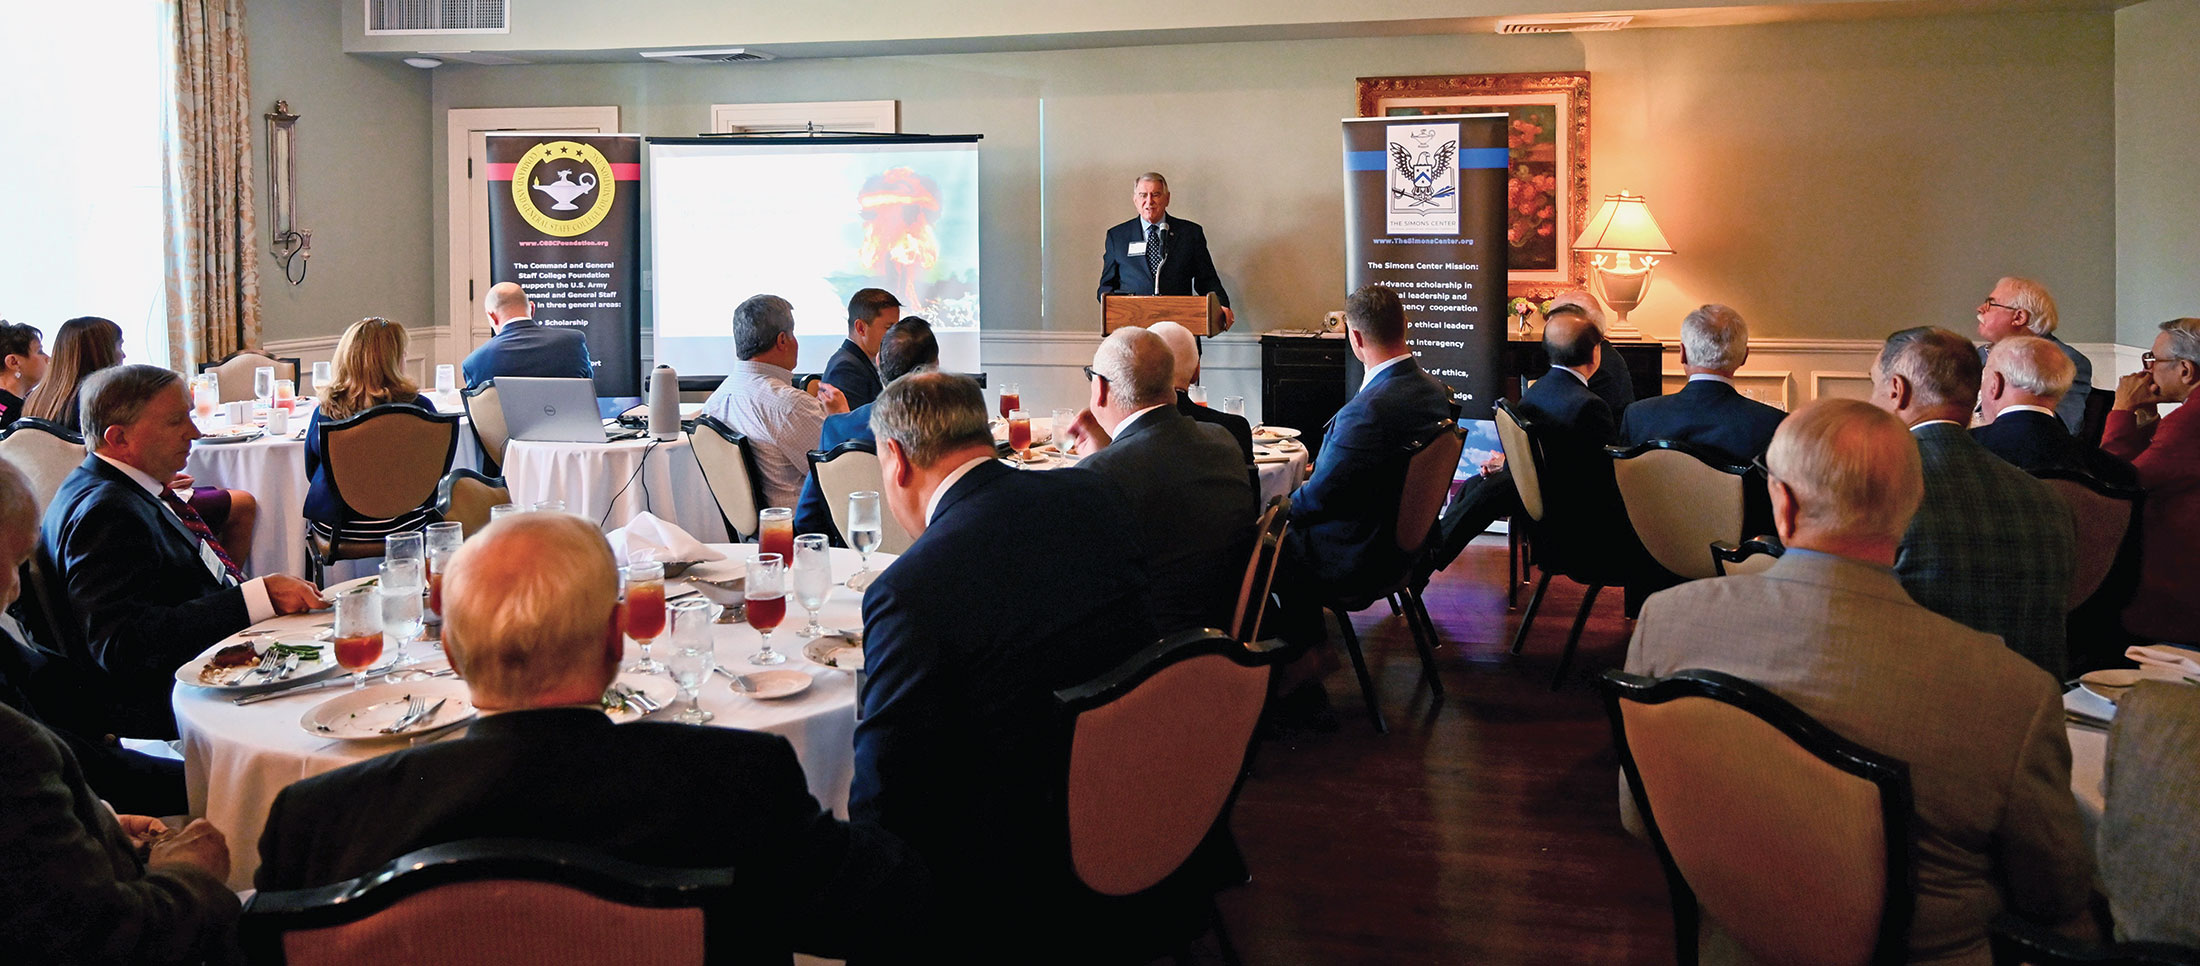 Retired Colonel Bob Ulin, founder and director of the Simons Center, delivers his presentation on nuclear weapons in Europe during the 1970s and 80s during the Arter-Rowland National Security Forum luncheon event on Sept. 21, 2023, at the Carriage Club in Kansas City.